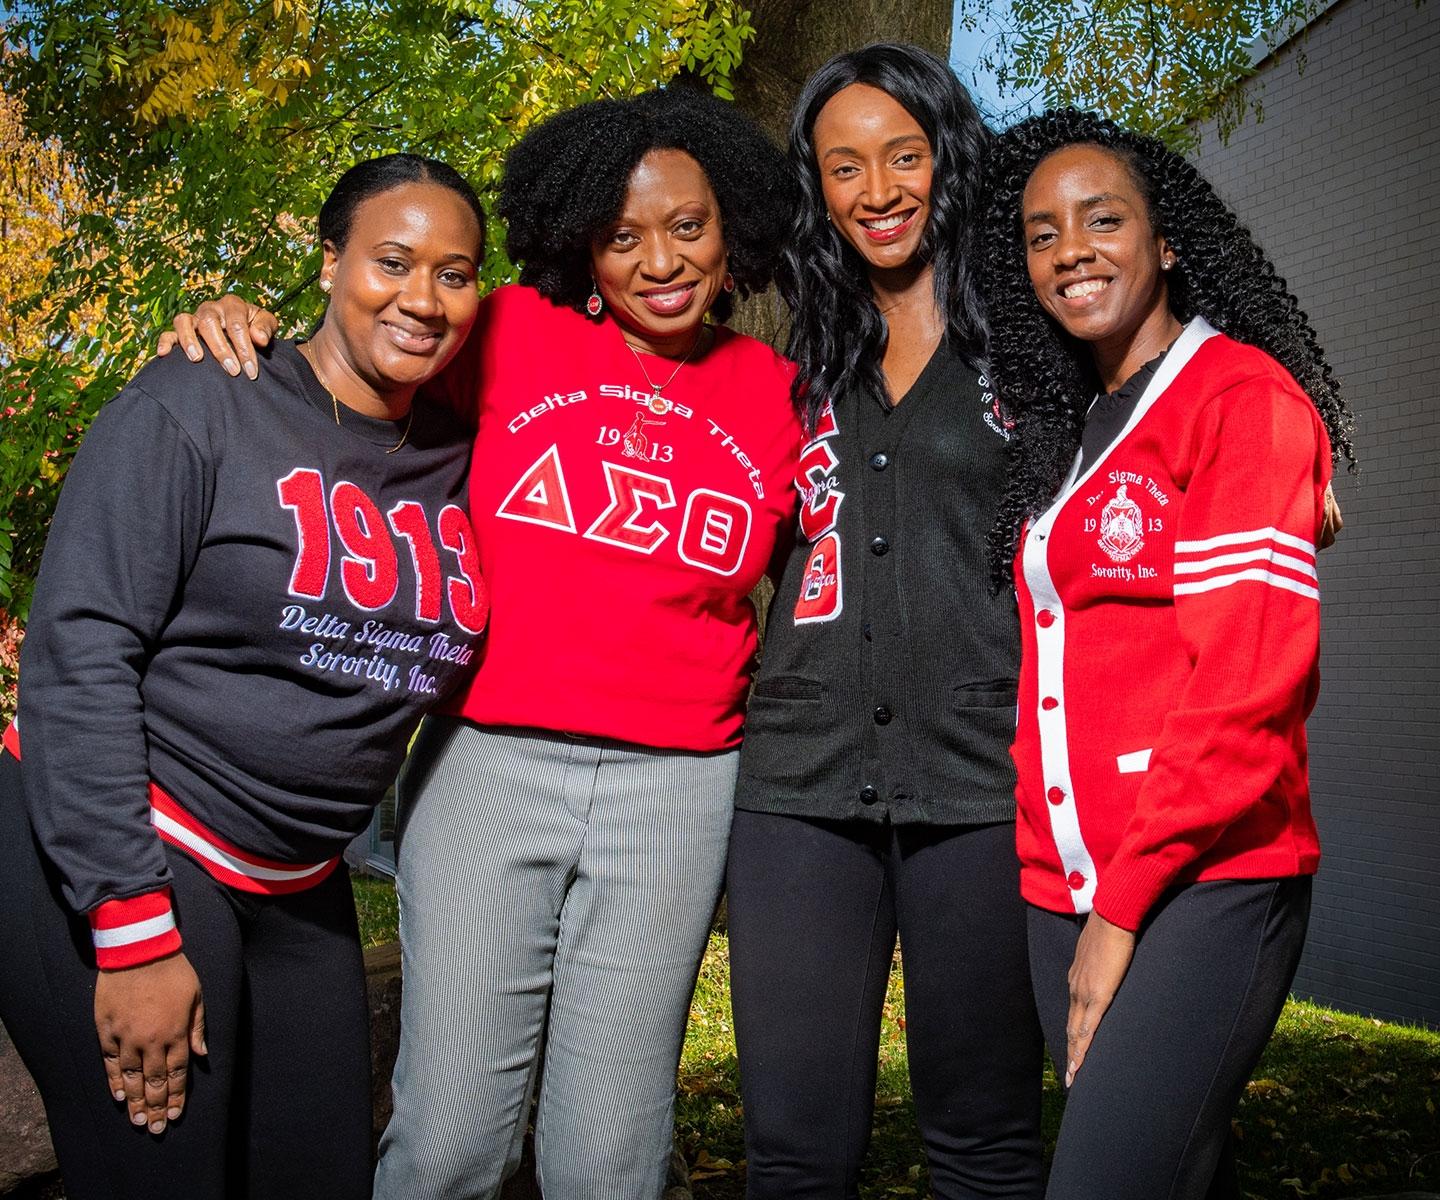 Four members of the Toronto chapter of Delta Sigma Theta Sorority, Inc., together outdoors in sorority clothing